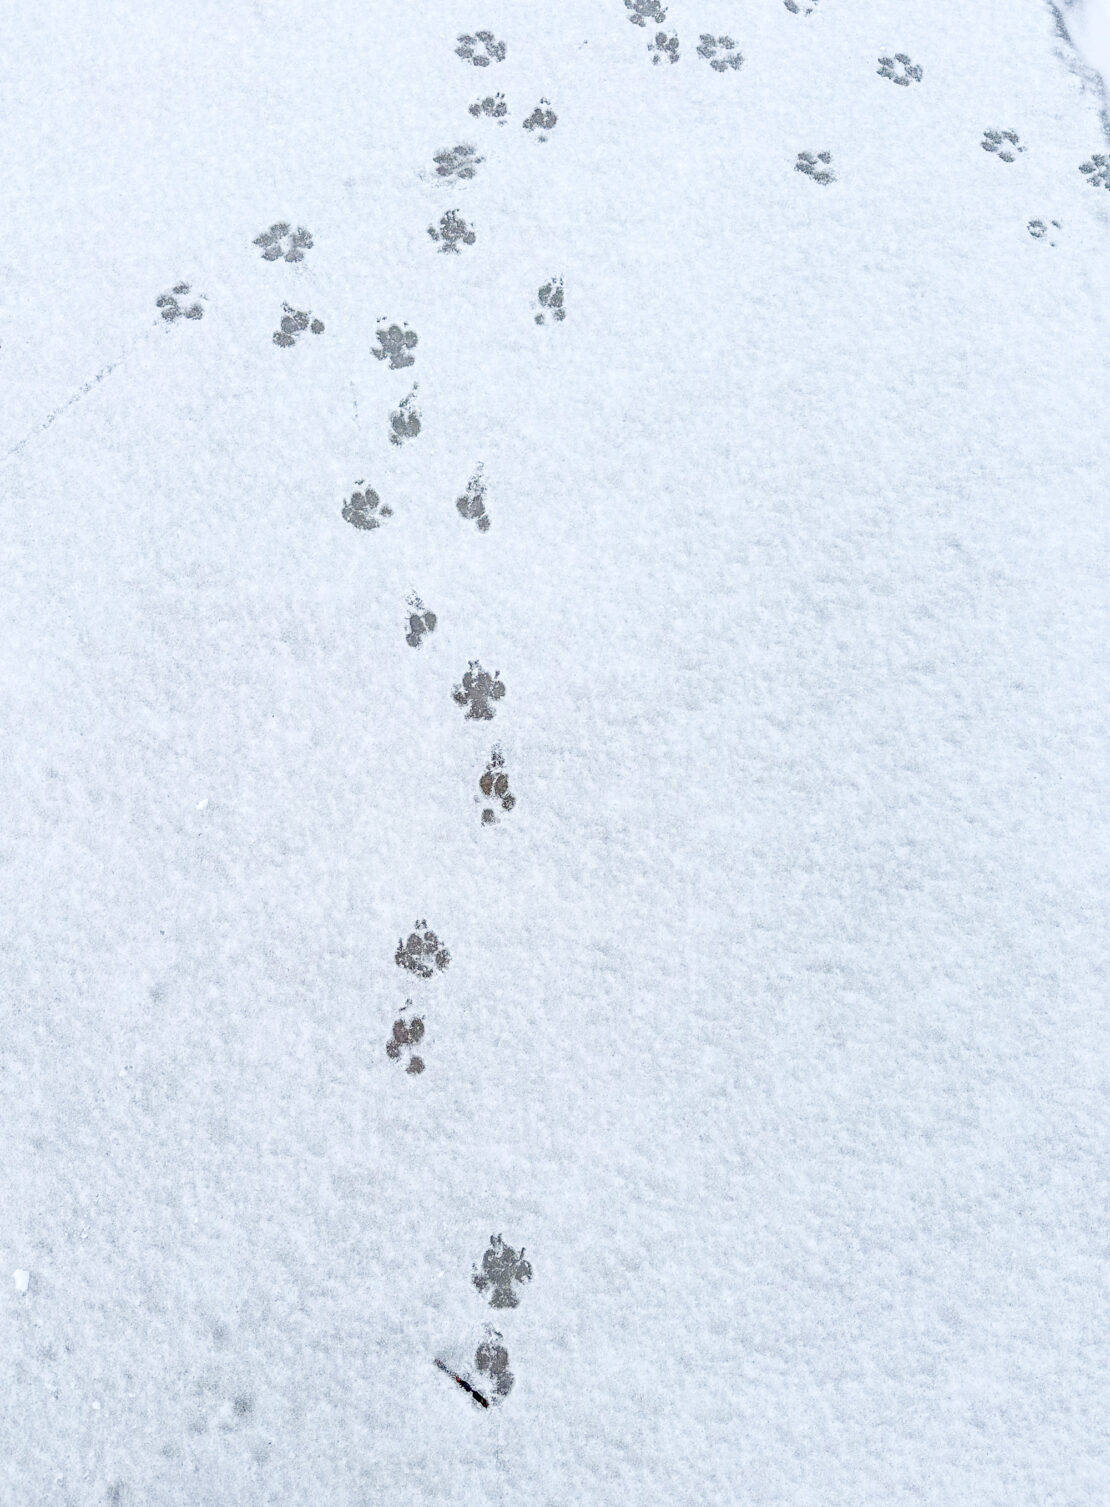 Animals tracks in the snow at Lahemaa National Park, Estonia 